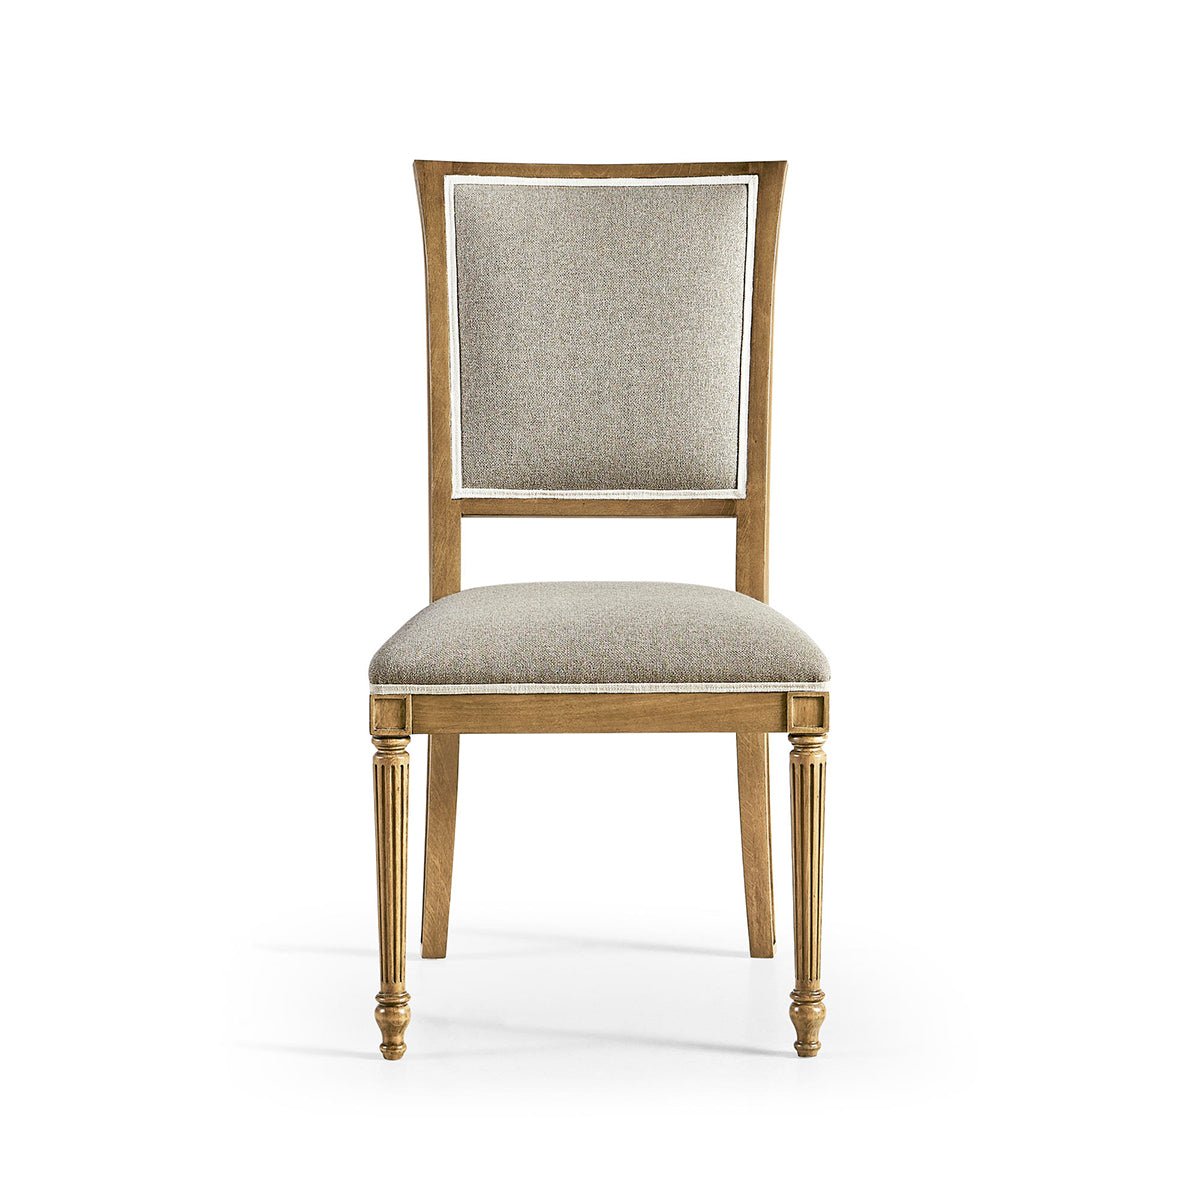 Classic French Dining Chair in Cherry Finish - English Georgian America